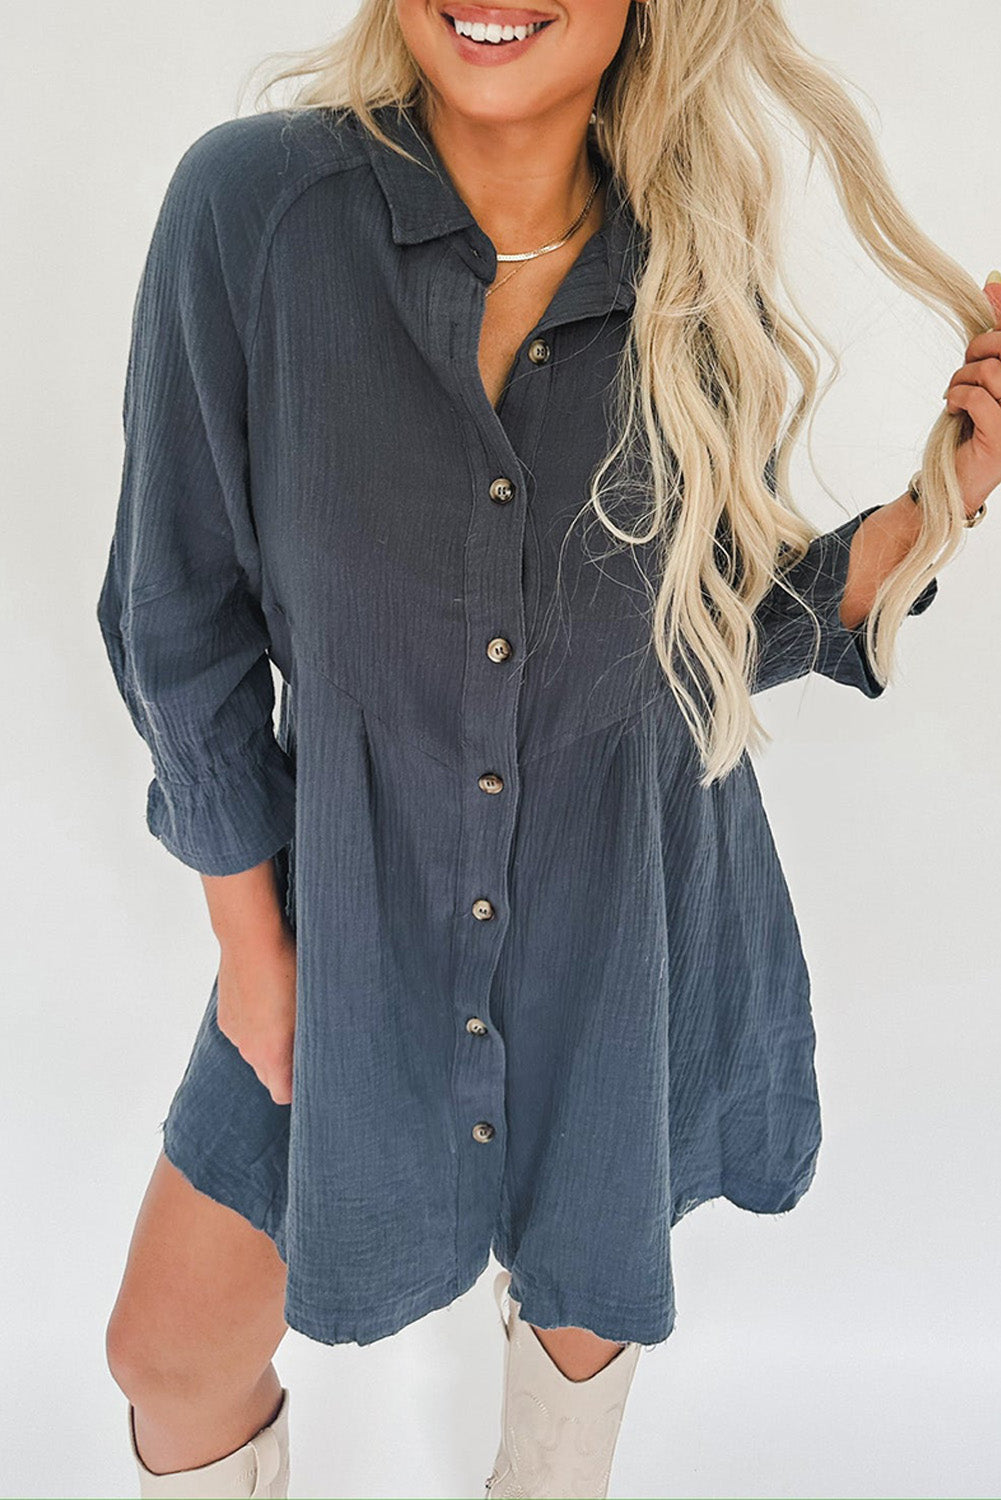 Sail Blue 3/4 Ruffled Sleeve Buttoned Crinkled Shirt Dress Sail Blue 100%Cotton casual dresses clothes dress dresses long sleeve dress long sleeve dresses short dresses